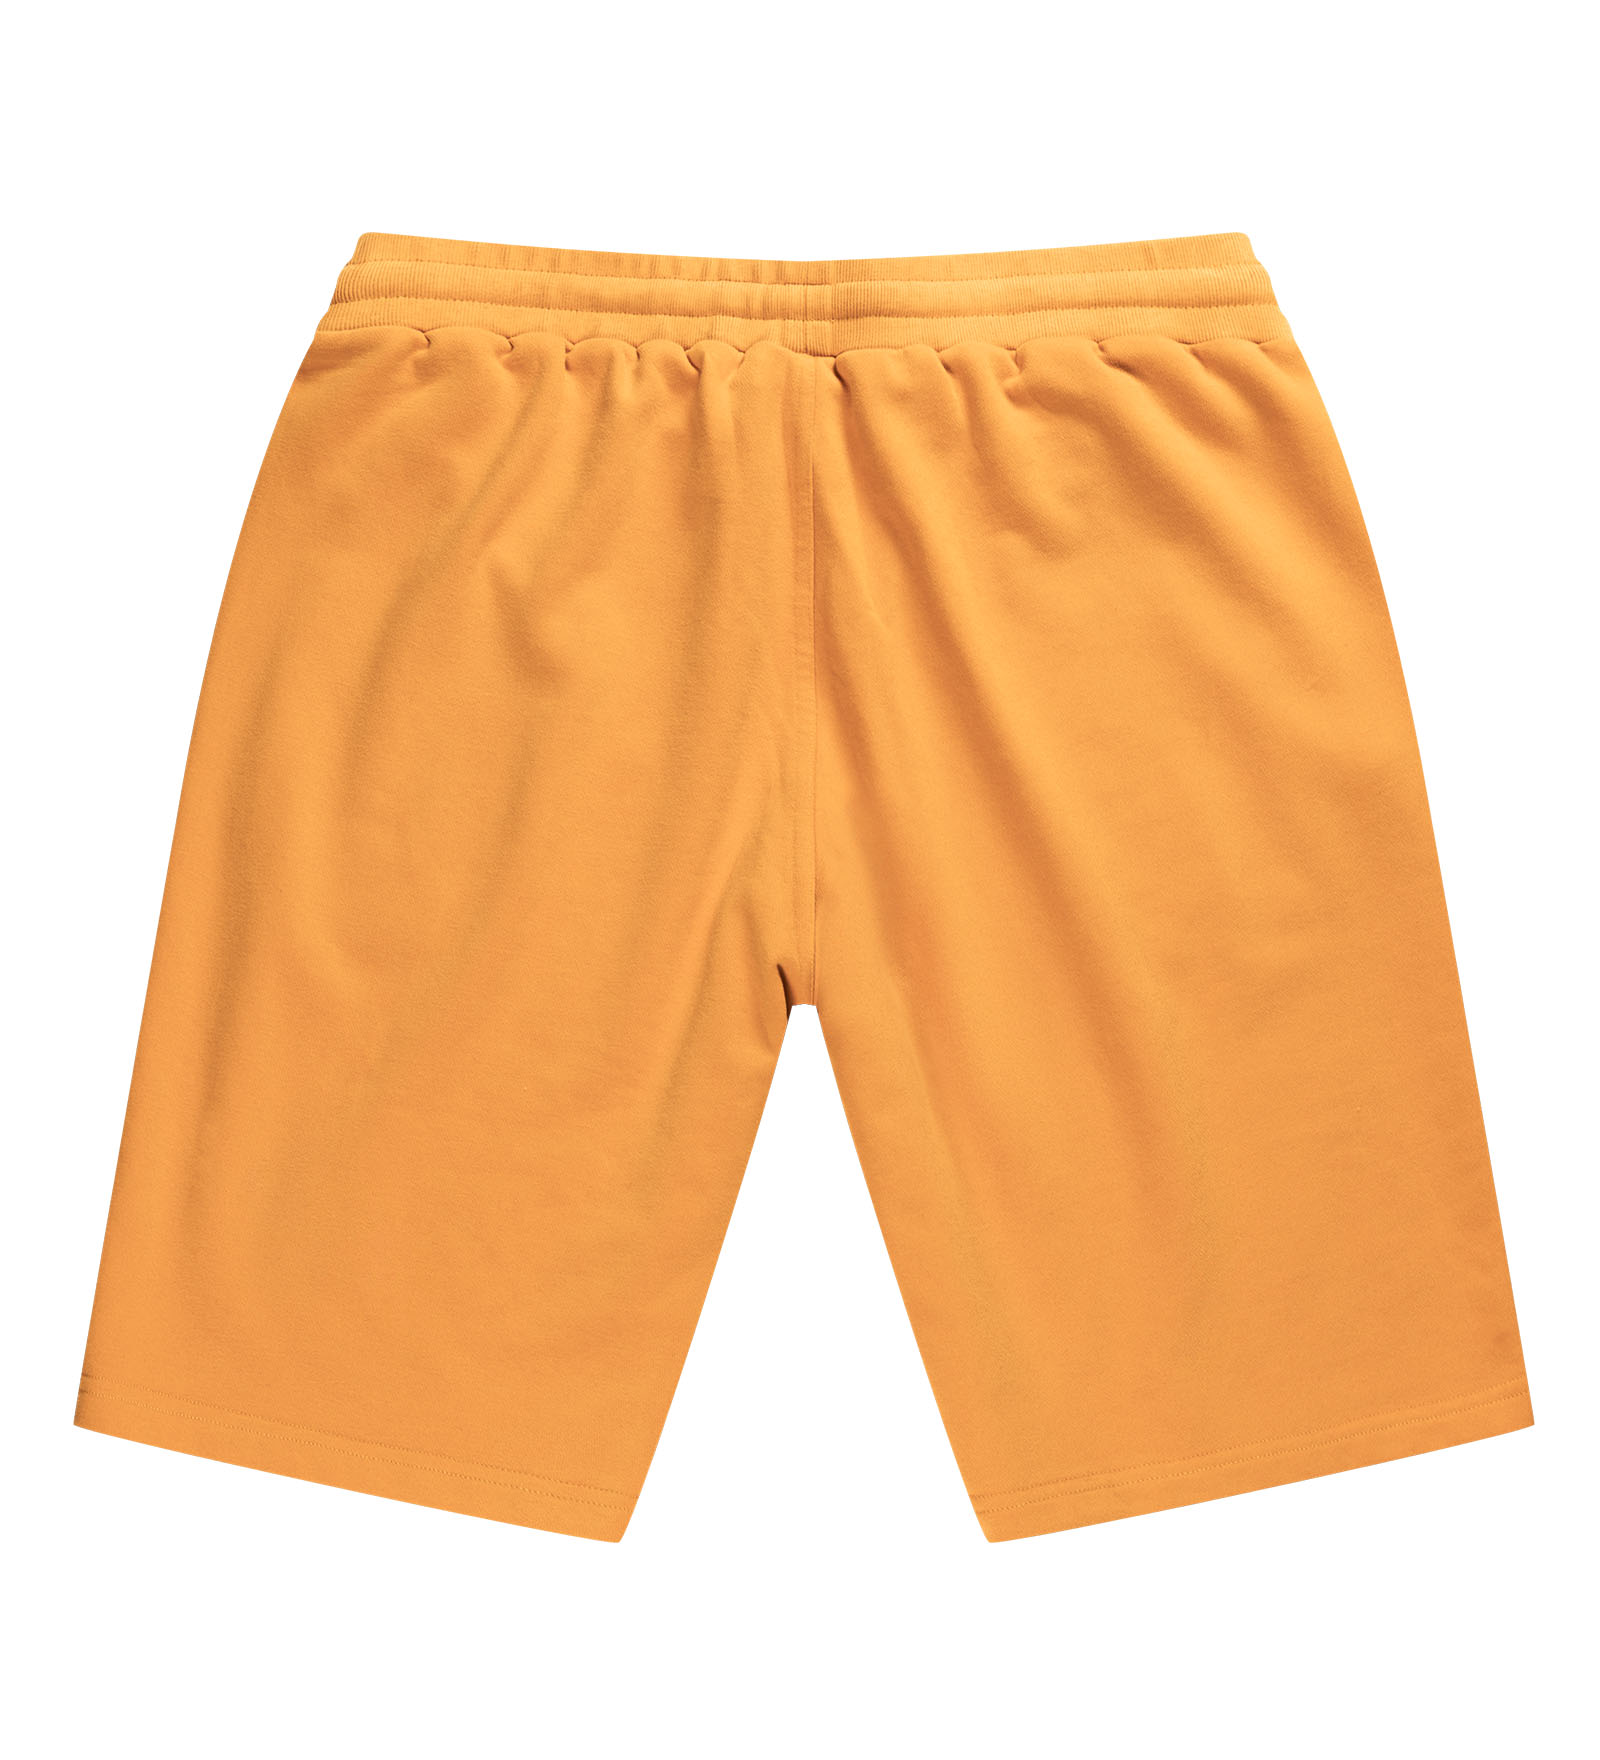 Sweat Shorts Yellow for Men and Women 